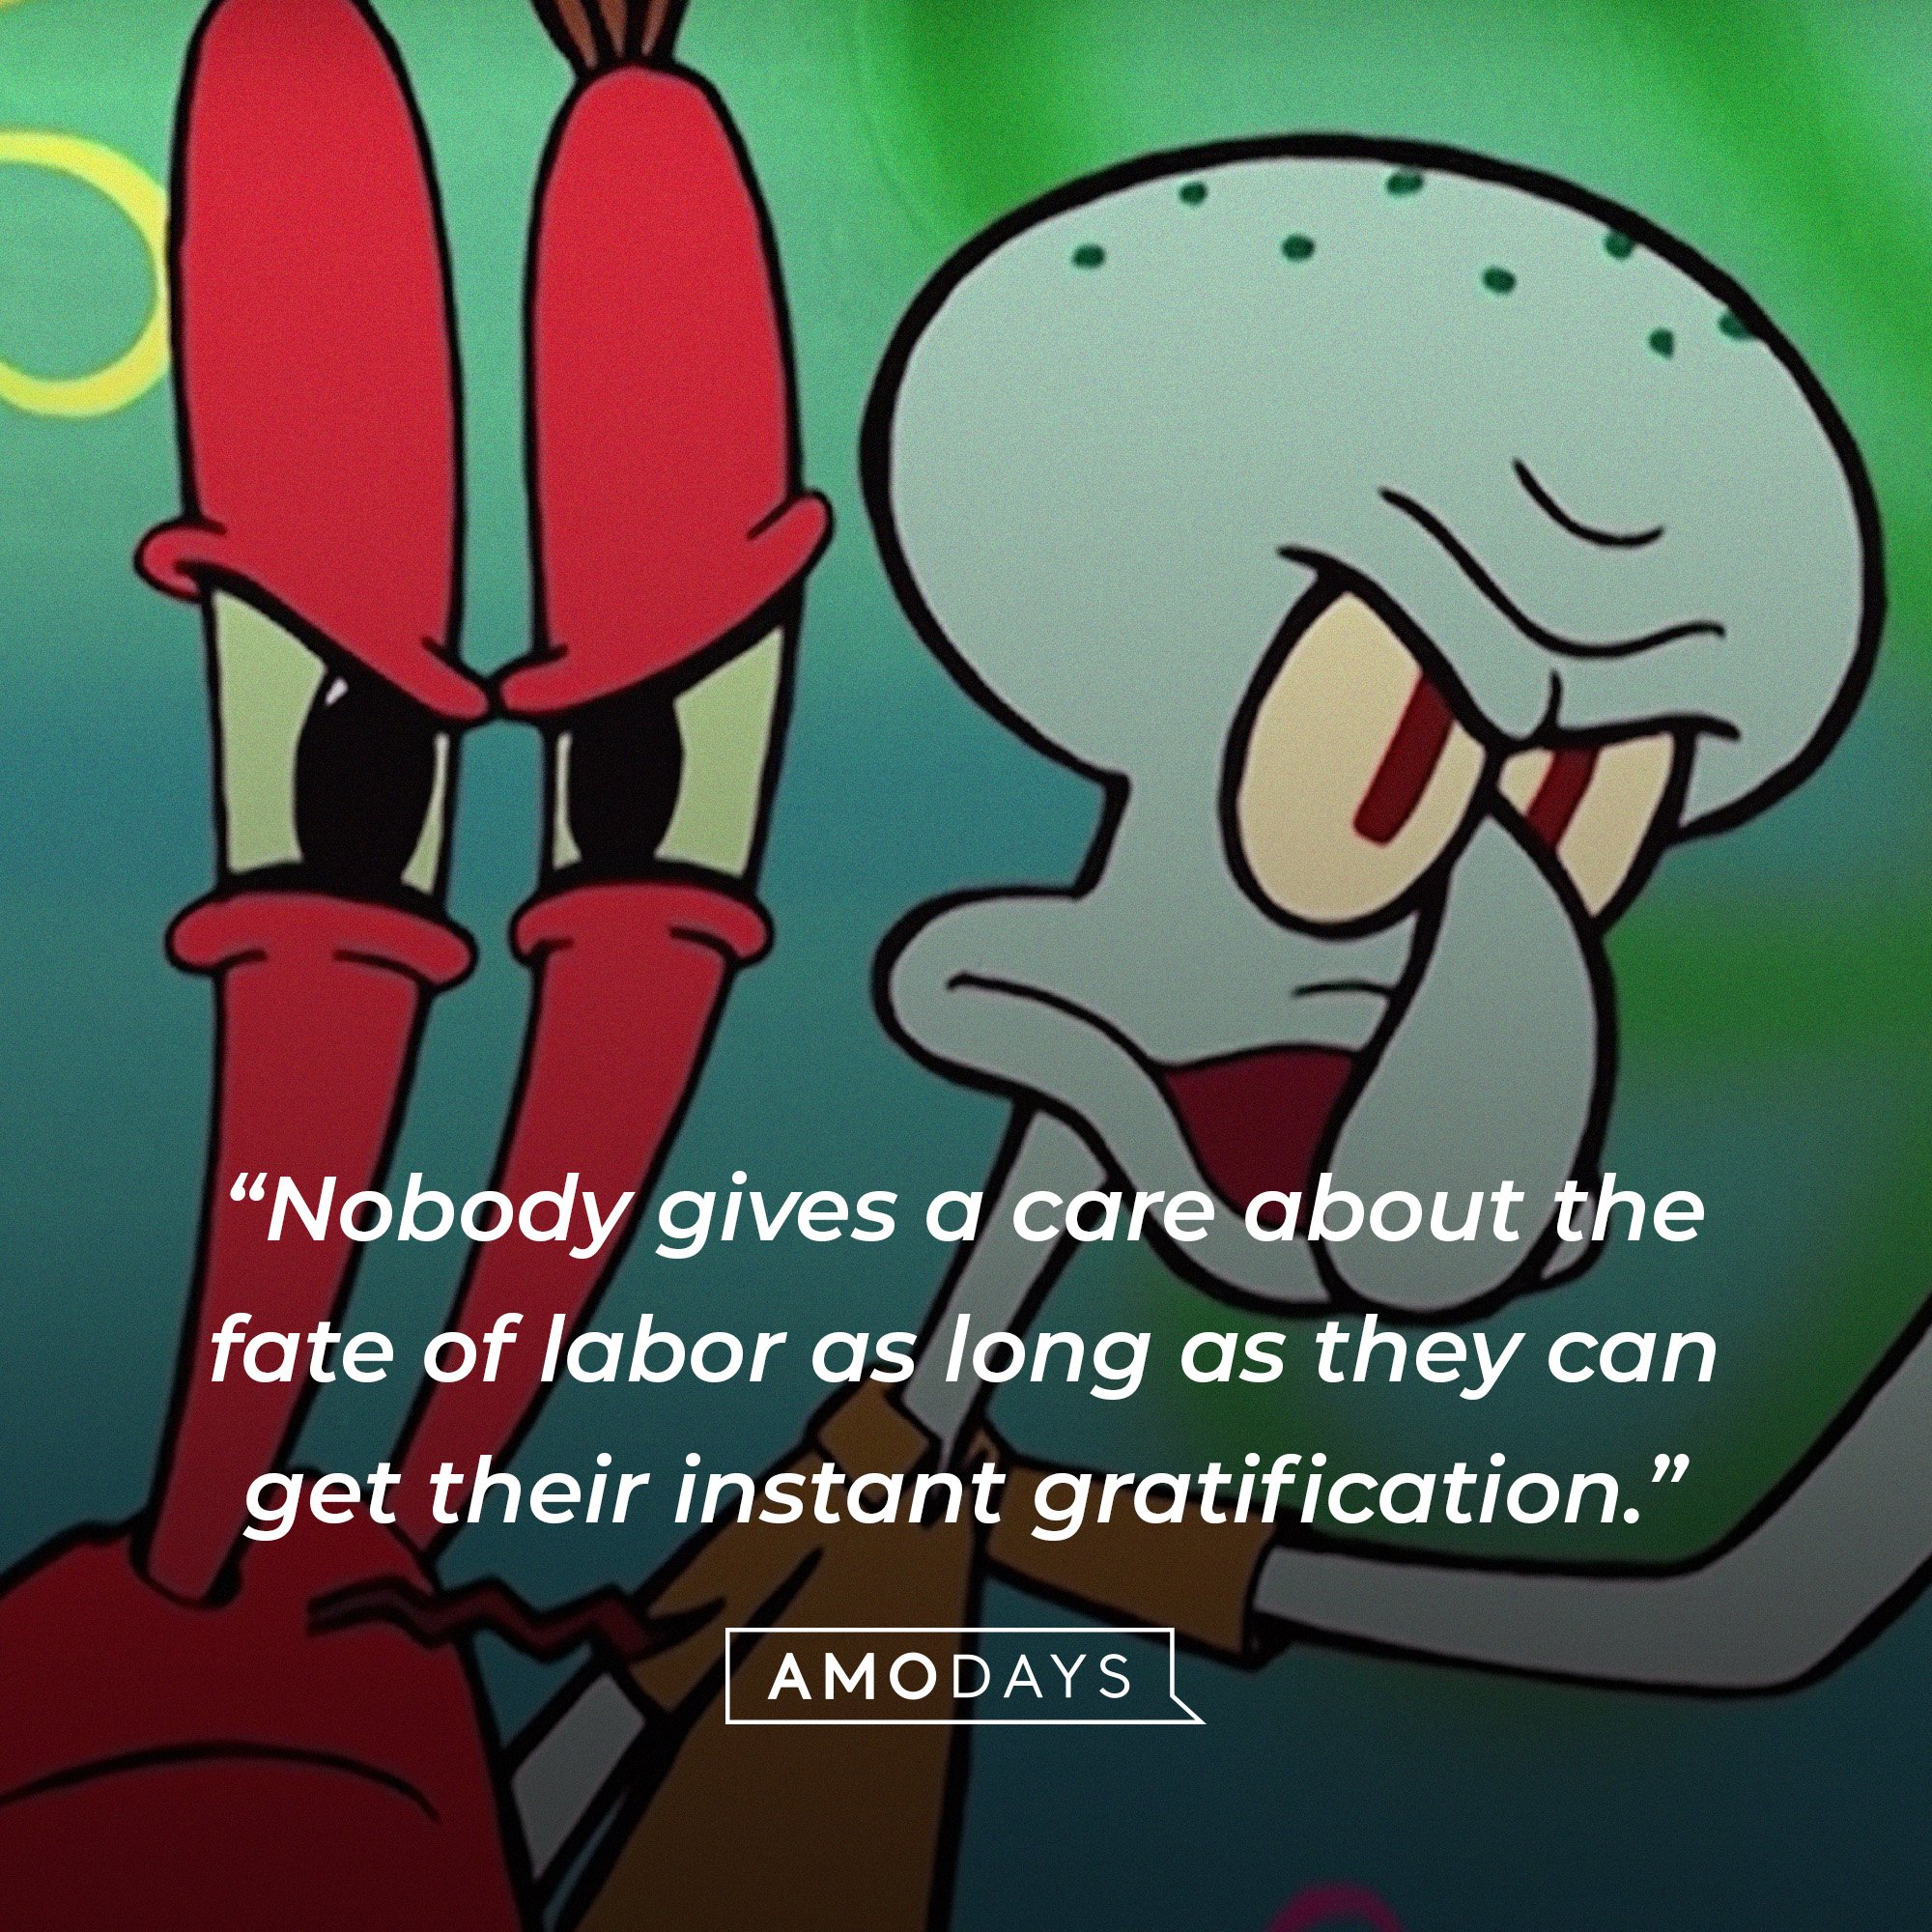 Squidward Tentacles’ quote: “Nobody gives a care about the fate of labor as long as they can get their instant gratification.” | Source: AmoDays